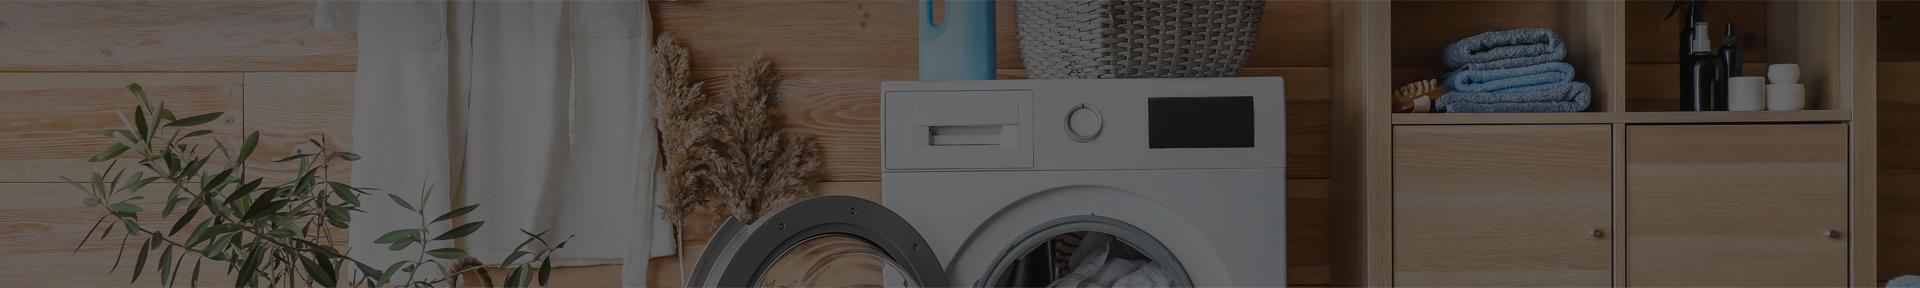 We provide the best laundry & Laundromats services near me in Auckland